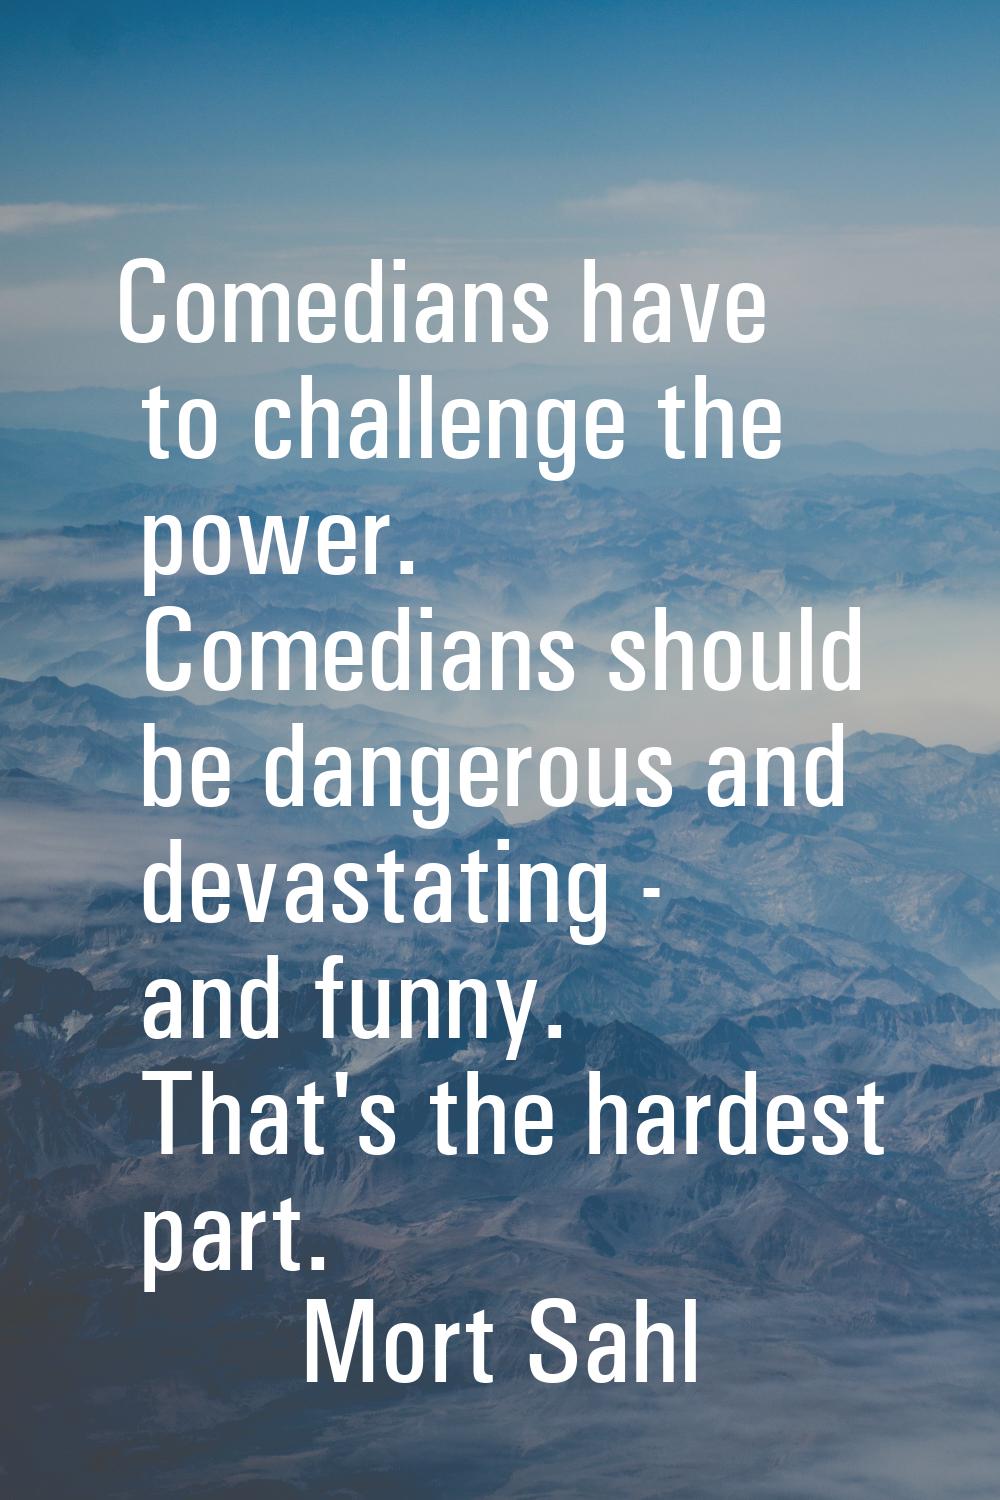 Comedians have to challenge the power. Comedians should be dangerous and devastating - and funny. T